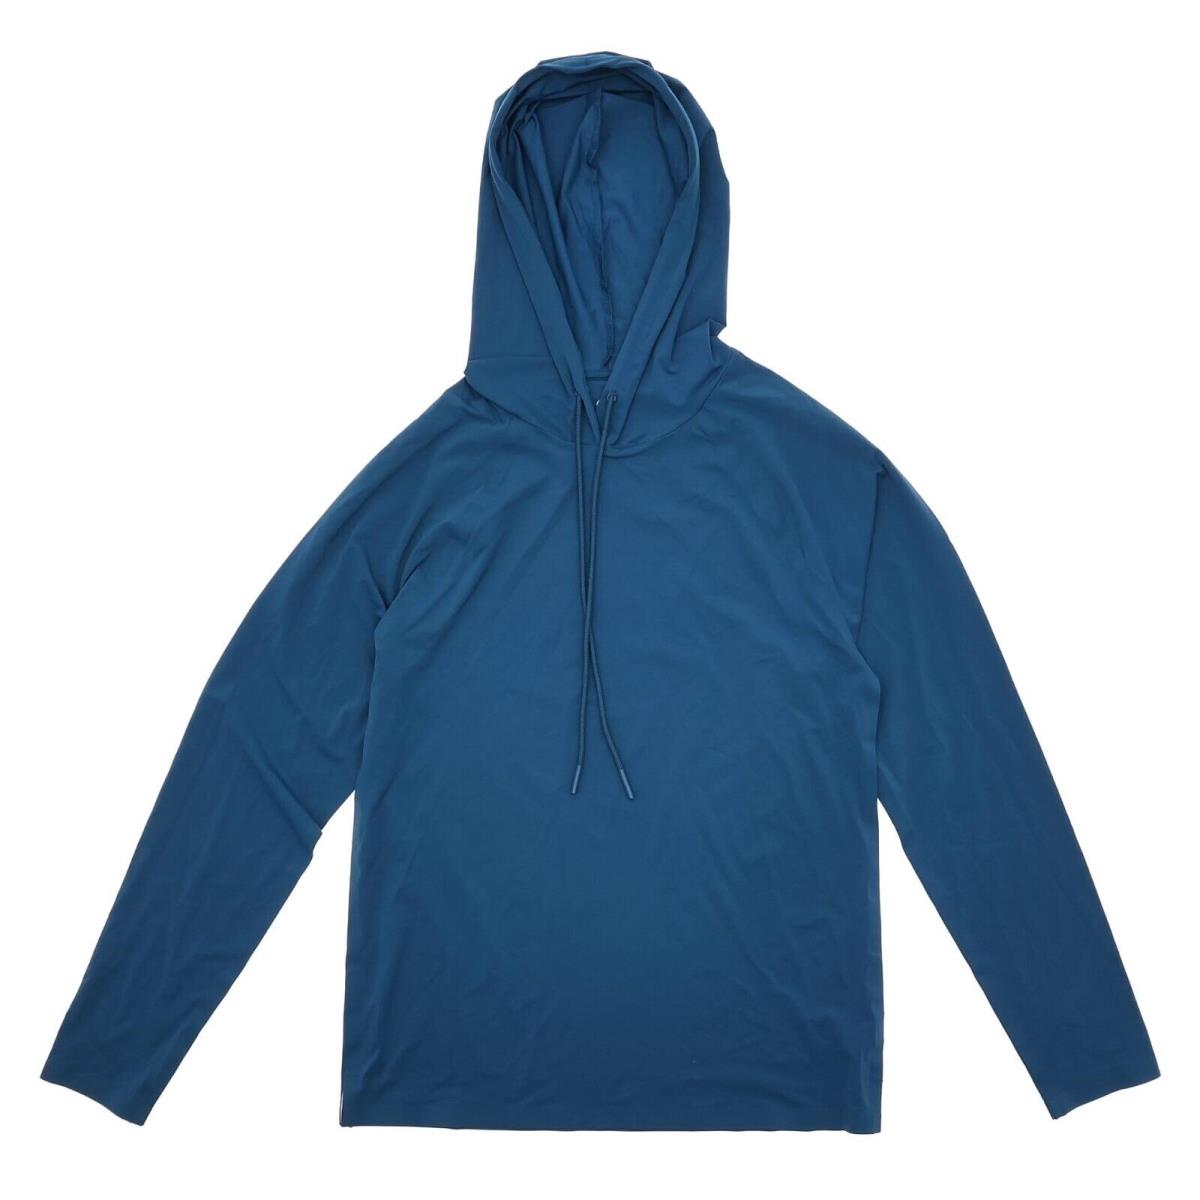 Alo Yoga L56129 Mineral Blue Idol Runner Hoodie Size S